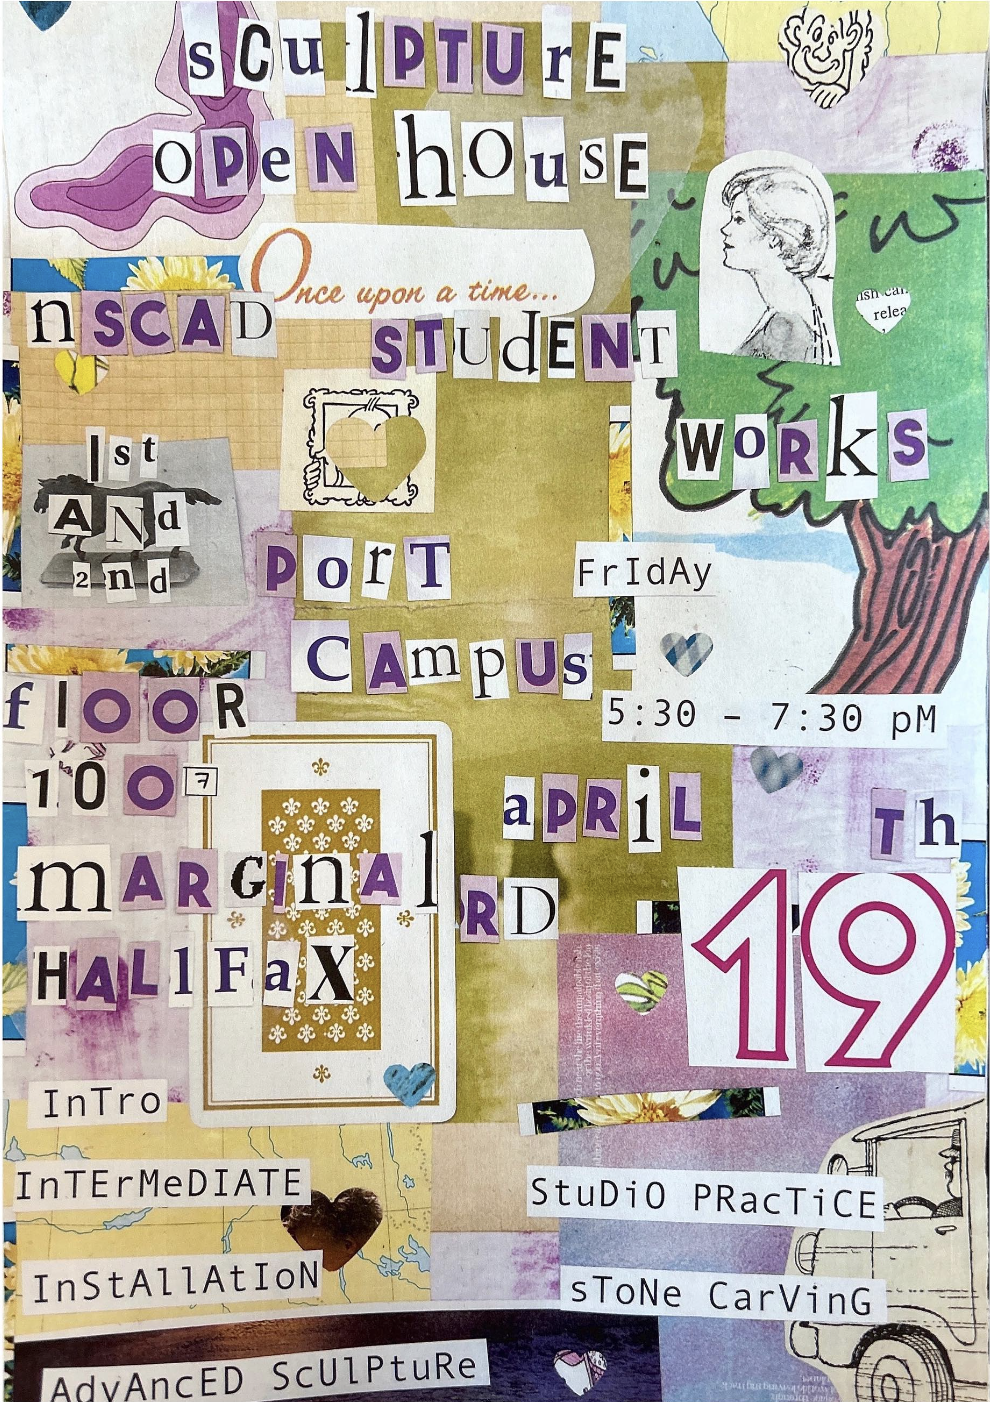 collage poster with details of open house event, pastel yellows, grees, purples, and blues